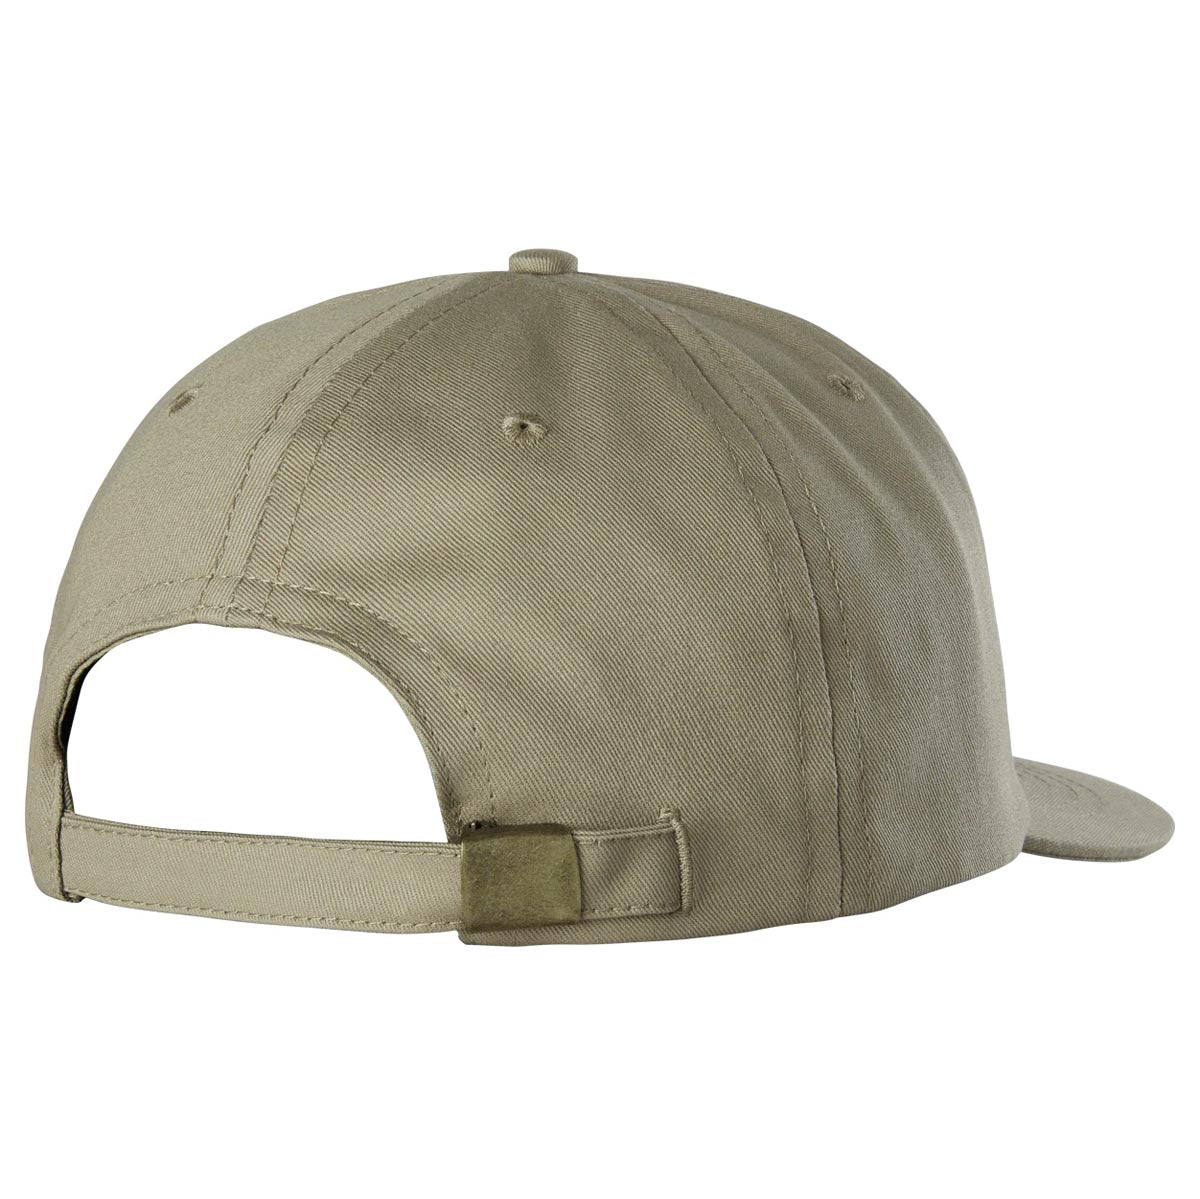 Emerica Pure Gold Dad Hat - Brown image 2